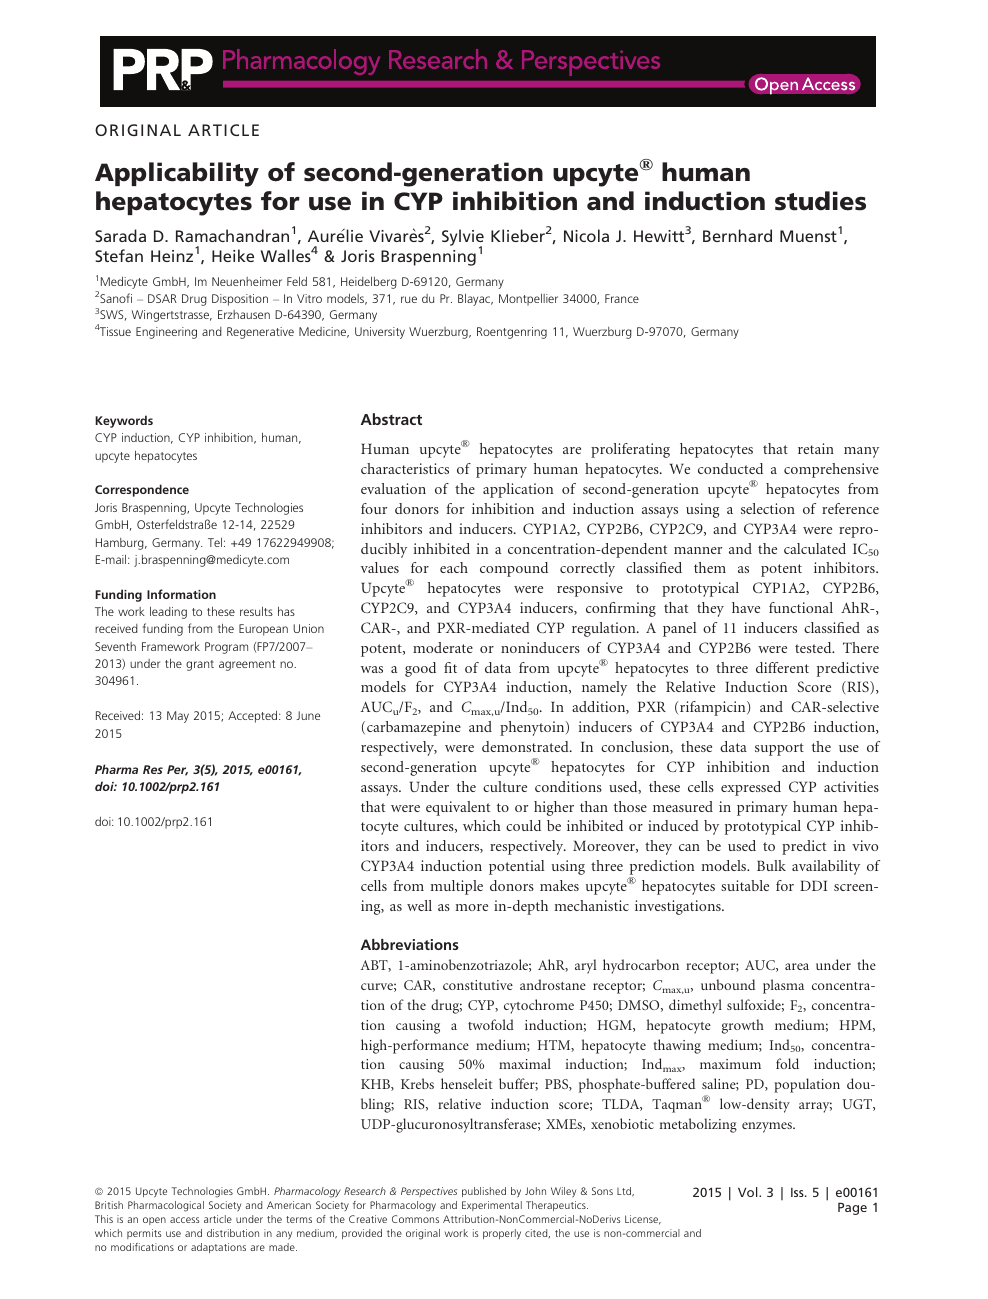 Applicability Of Second Generation Upcyte Human Hepatocytes For Use In Cyp Inhibition And Induction Studies Topic Of Research Paper In Biological Sciences Download Scholarly Article Pdf And Read For Free On